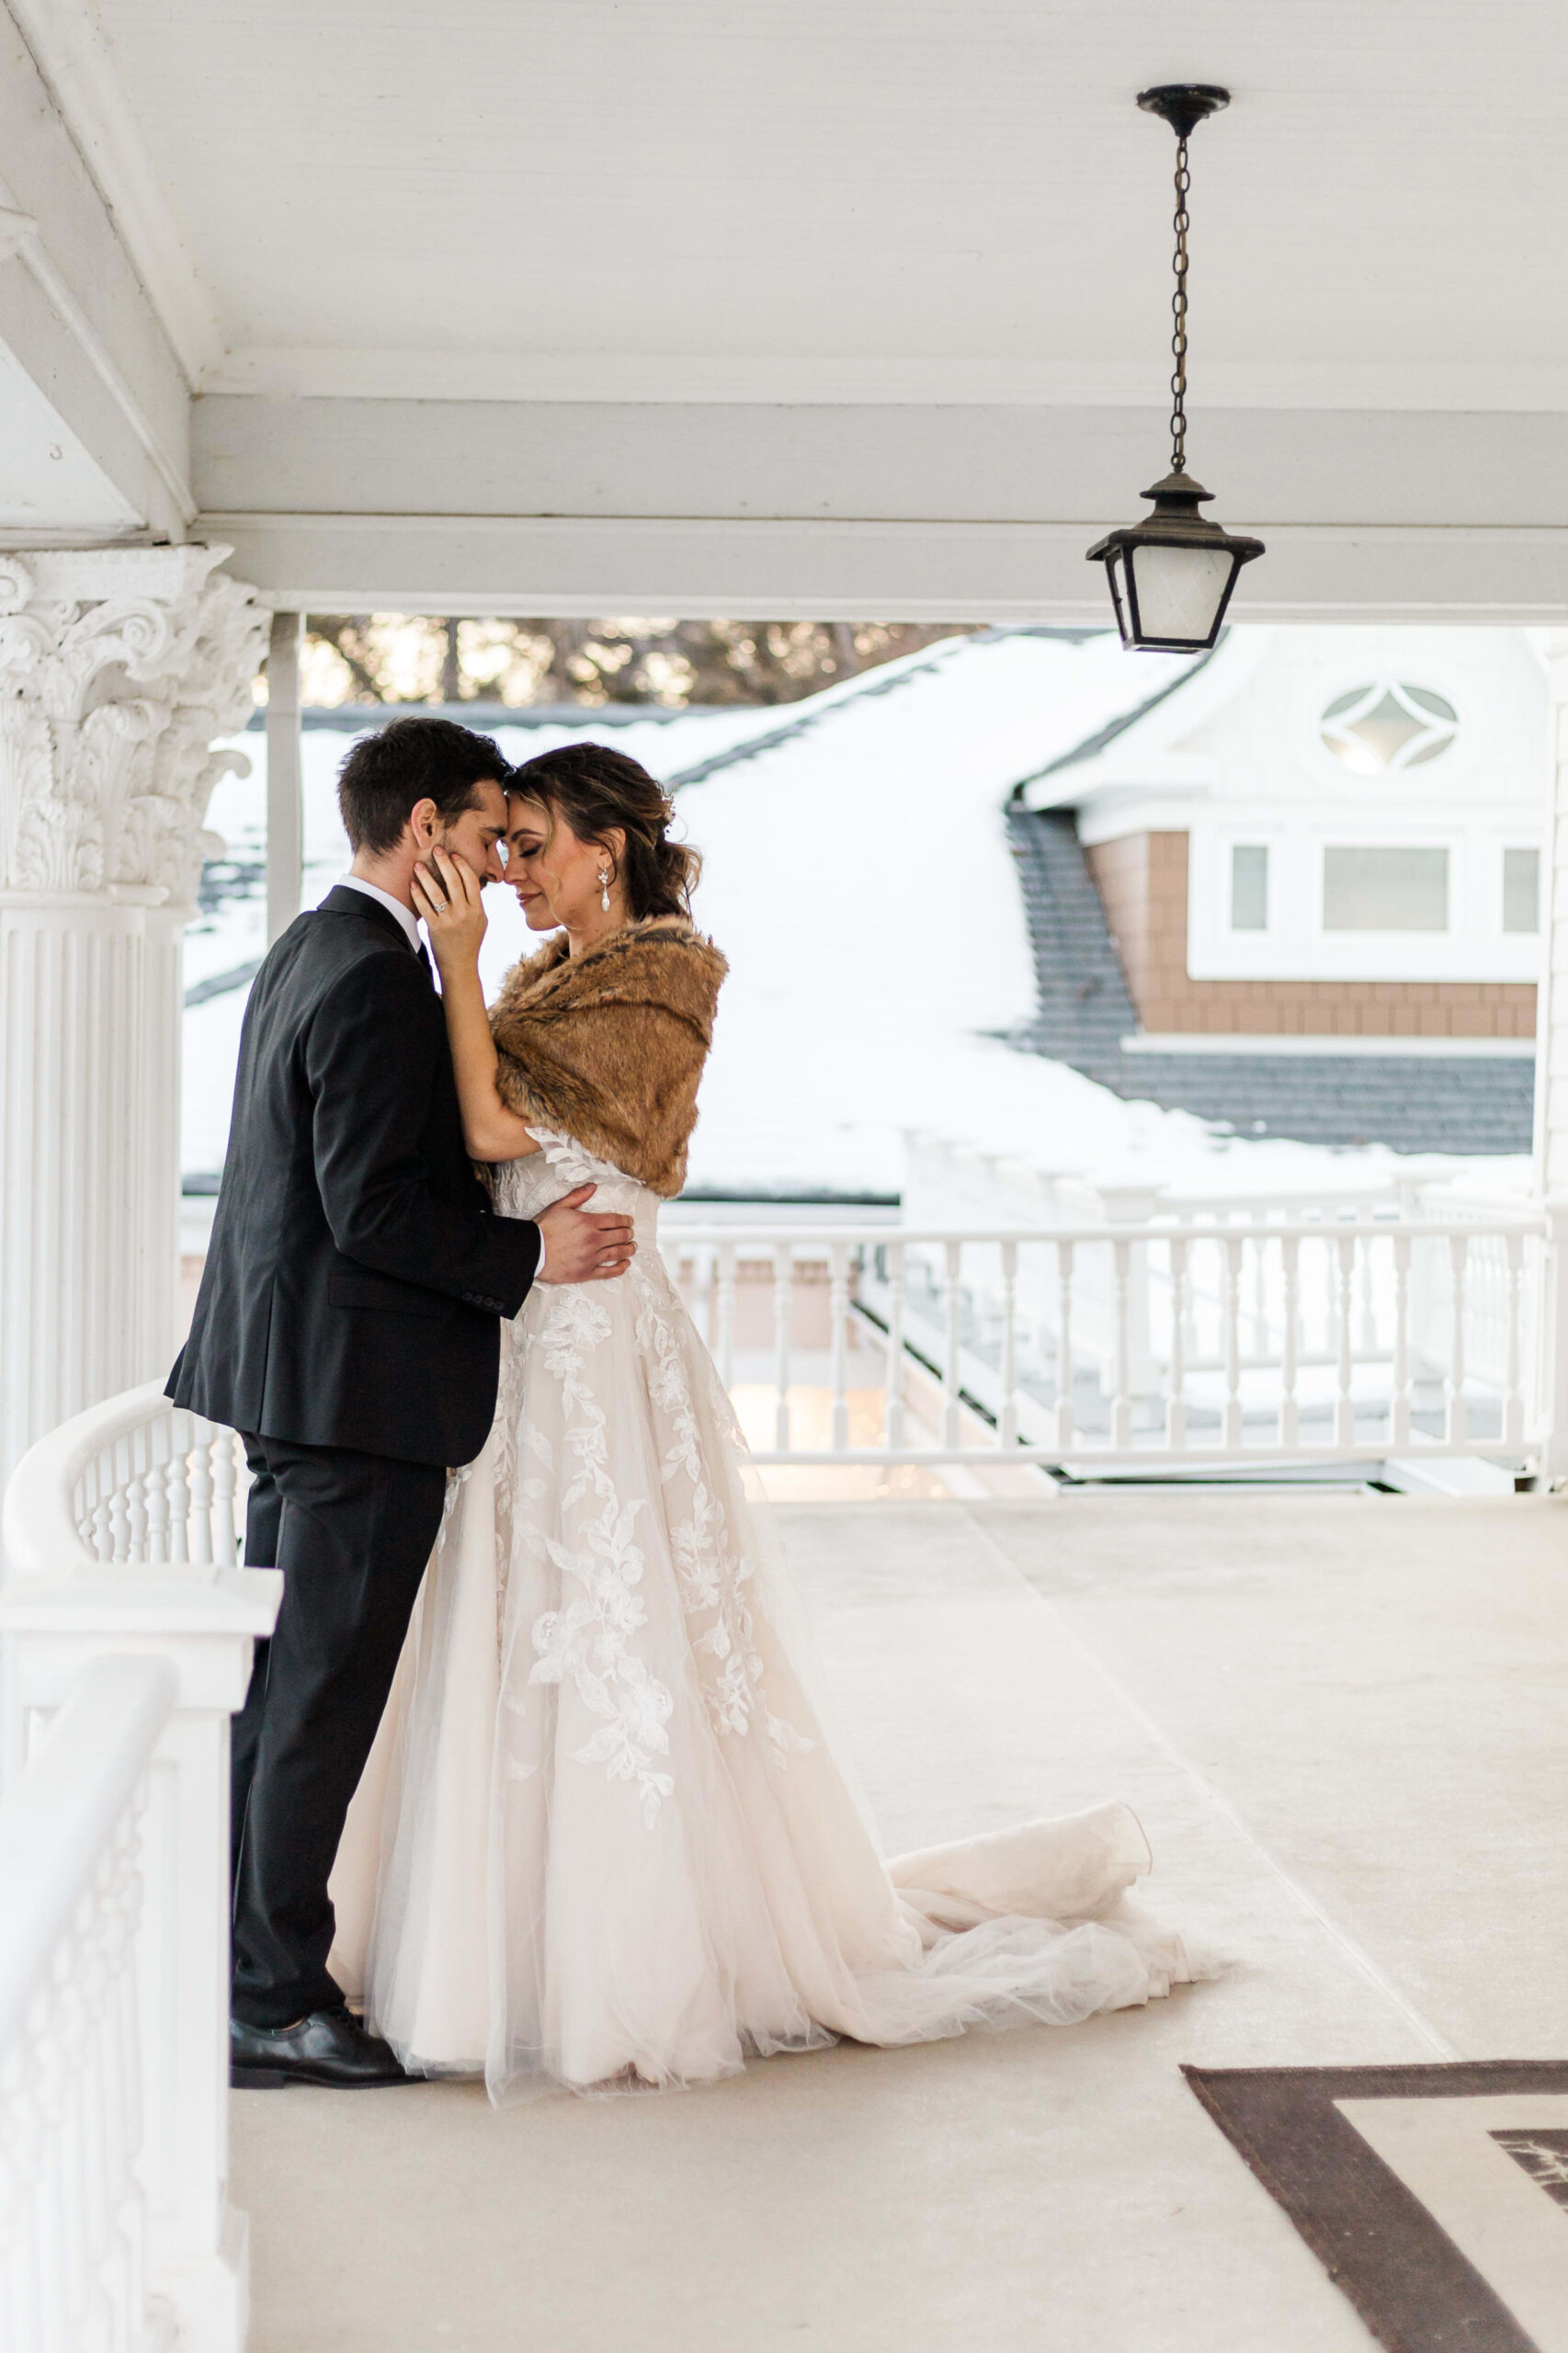 Brittany Anne Photography – Winter Wonderland at the Norland Historic Estate-25